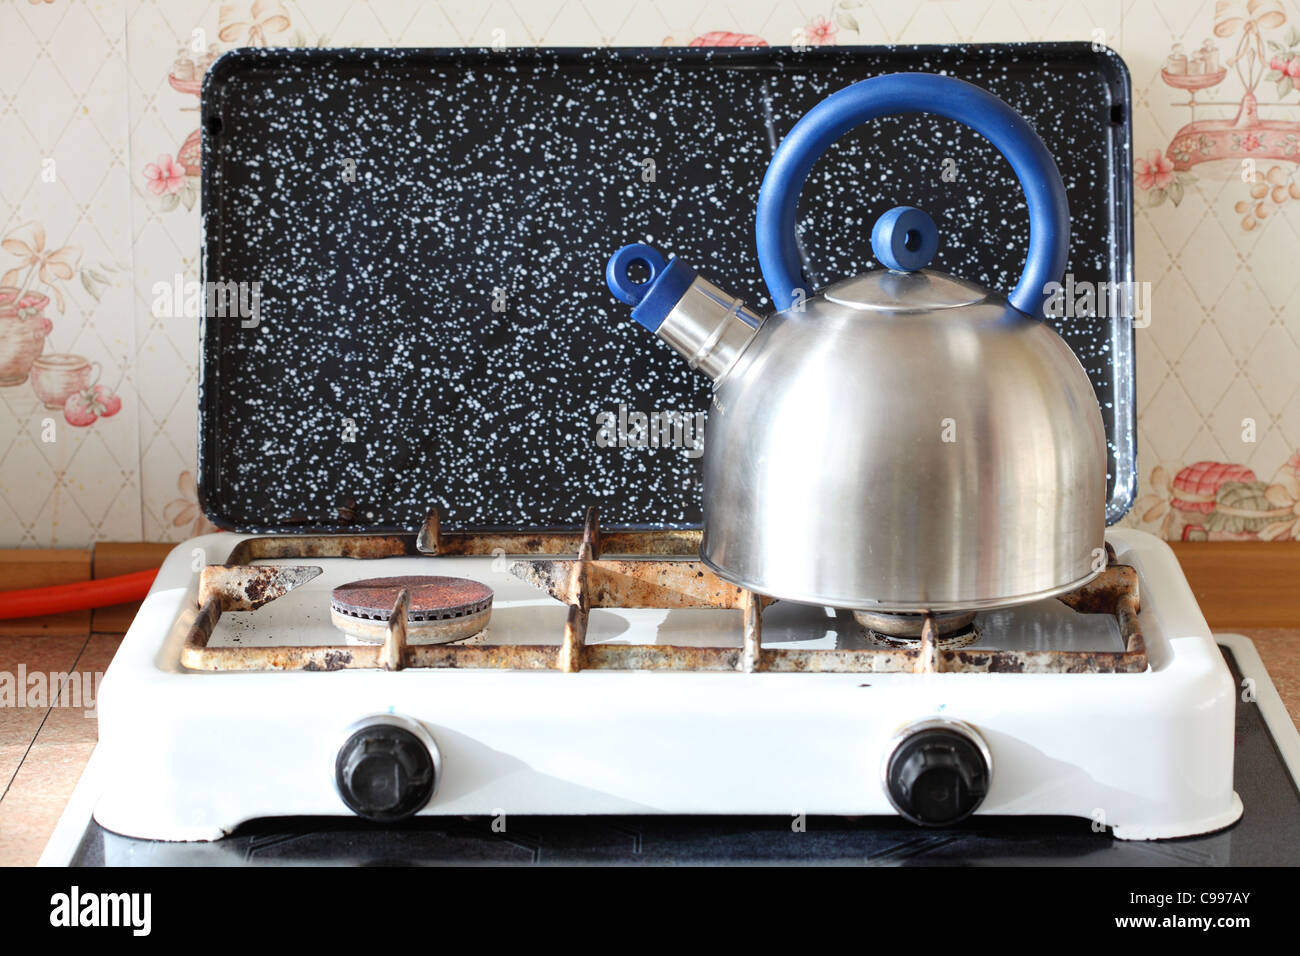 Tea kettle with boiling water on gas stove Stock Photo by ©Kruchenkova  58951339